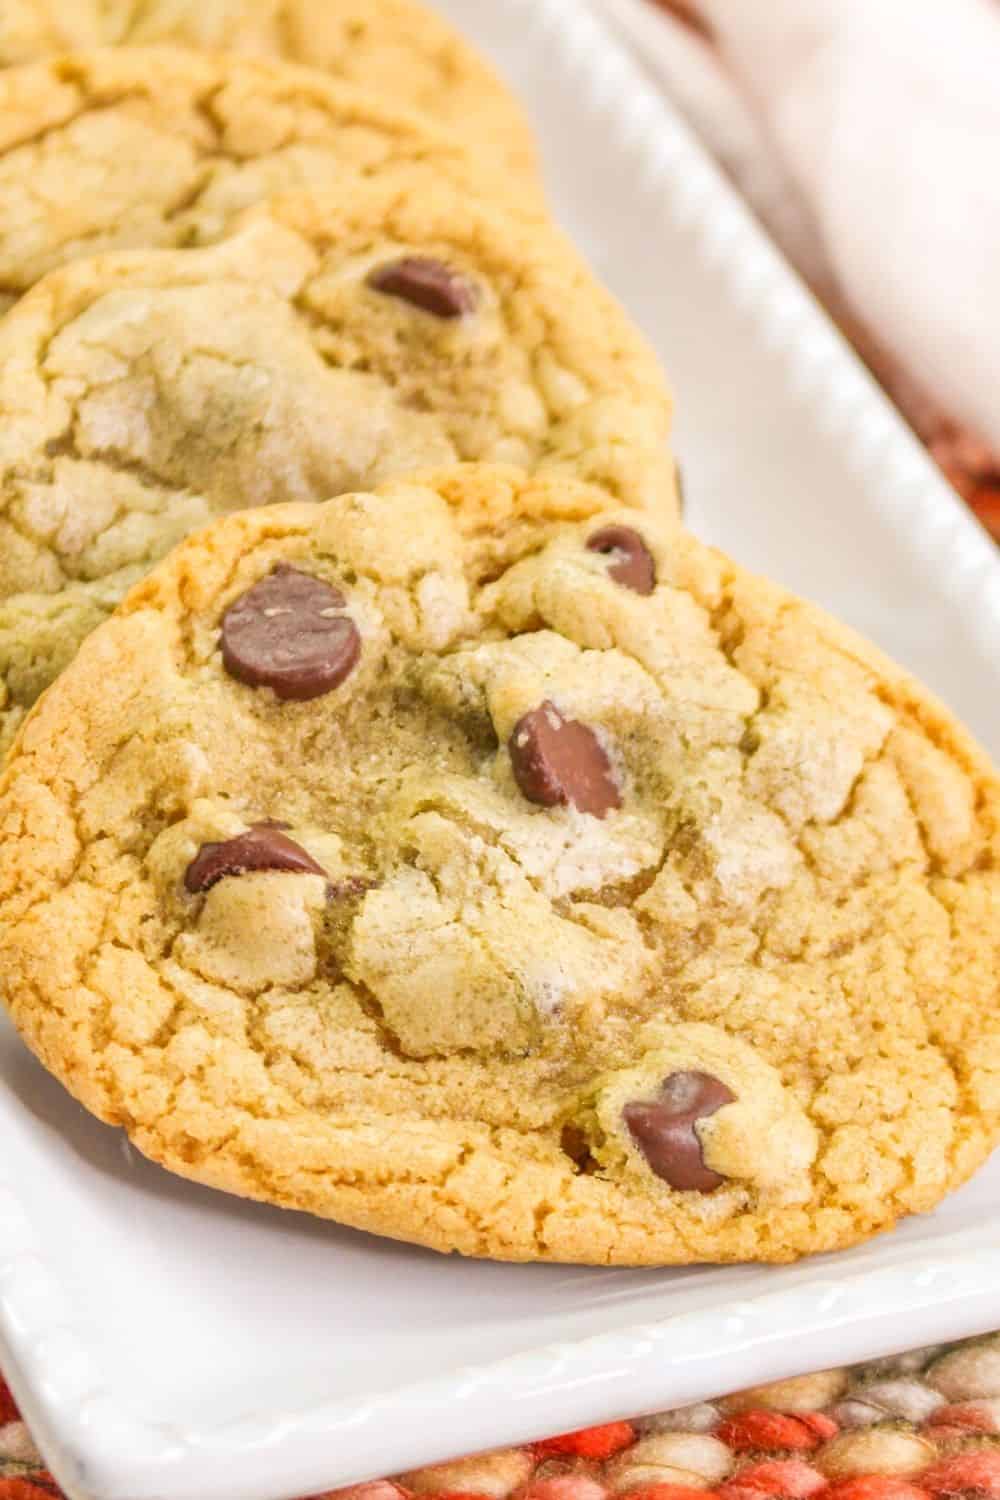 close-up view of a chocolate chip cookie without butter, served on a white rectangular plate.